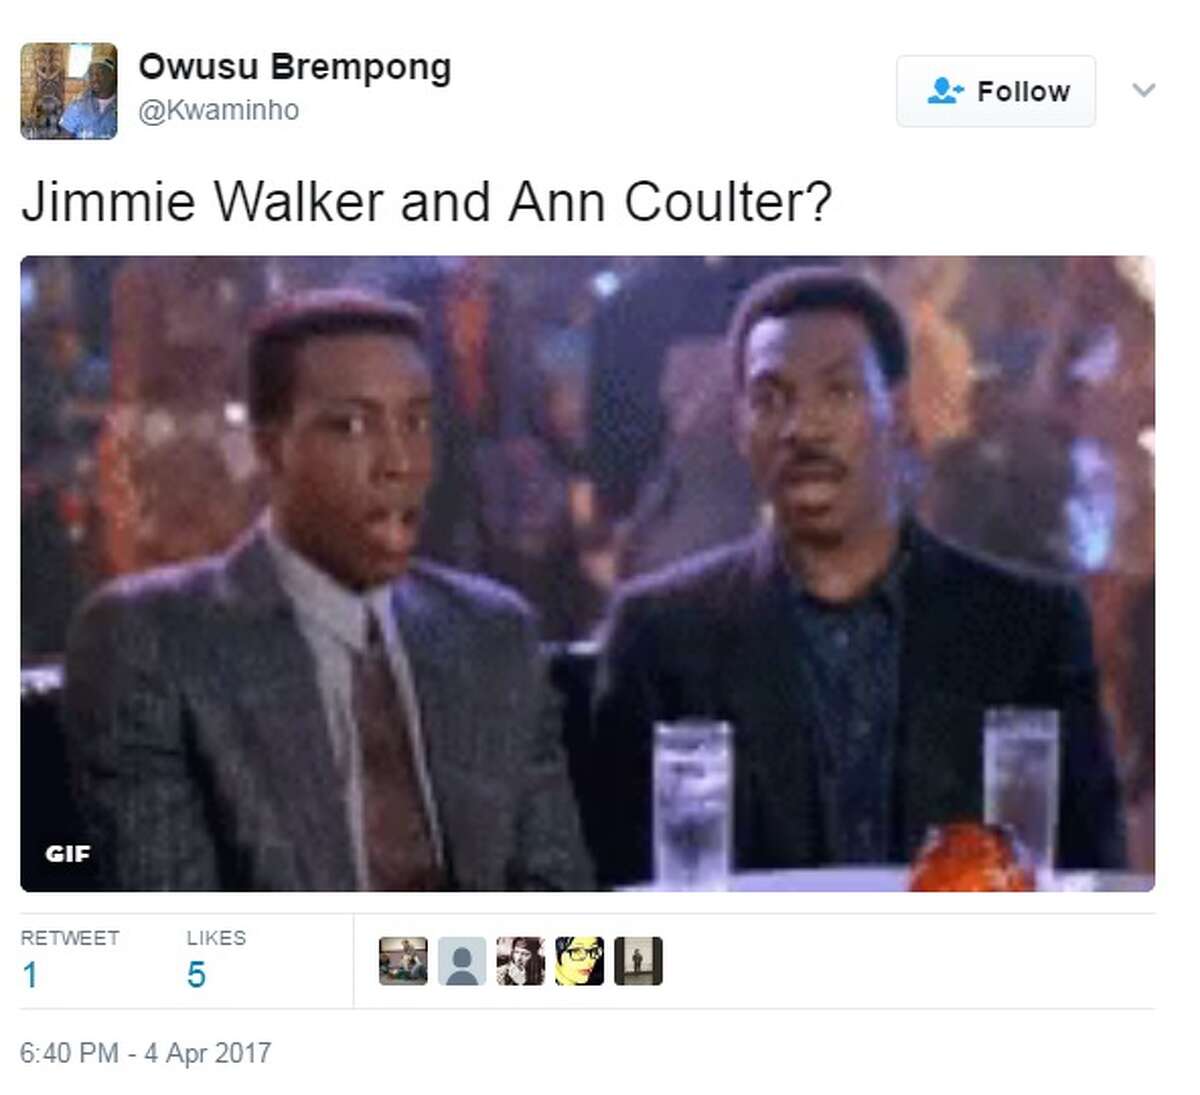 It was revealed in an Entertainment Weekly story on April 4, 2017 that Ann Coulter may be dating Jimmie Walker of the 1970's sitcom Good Times. The internet wasn't sure what to make of the news. Image source: Twitter